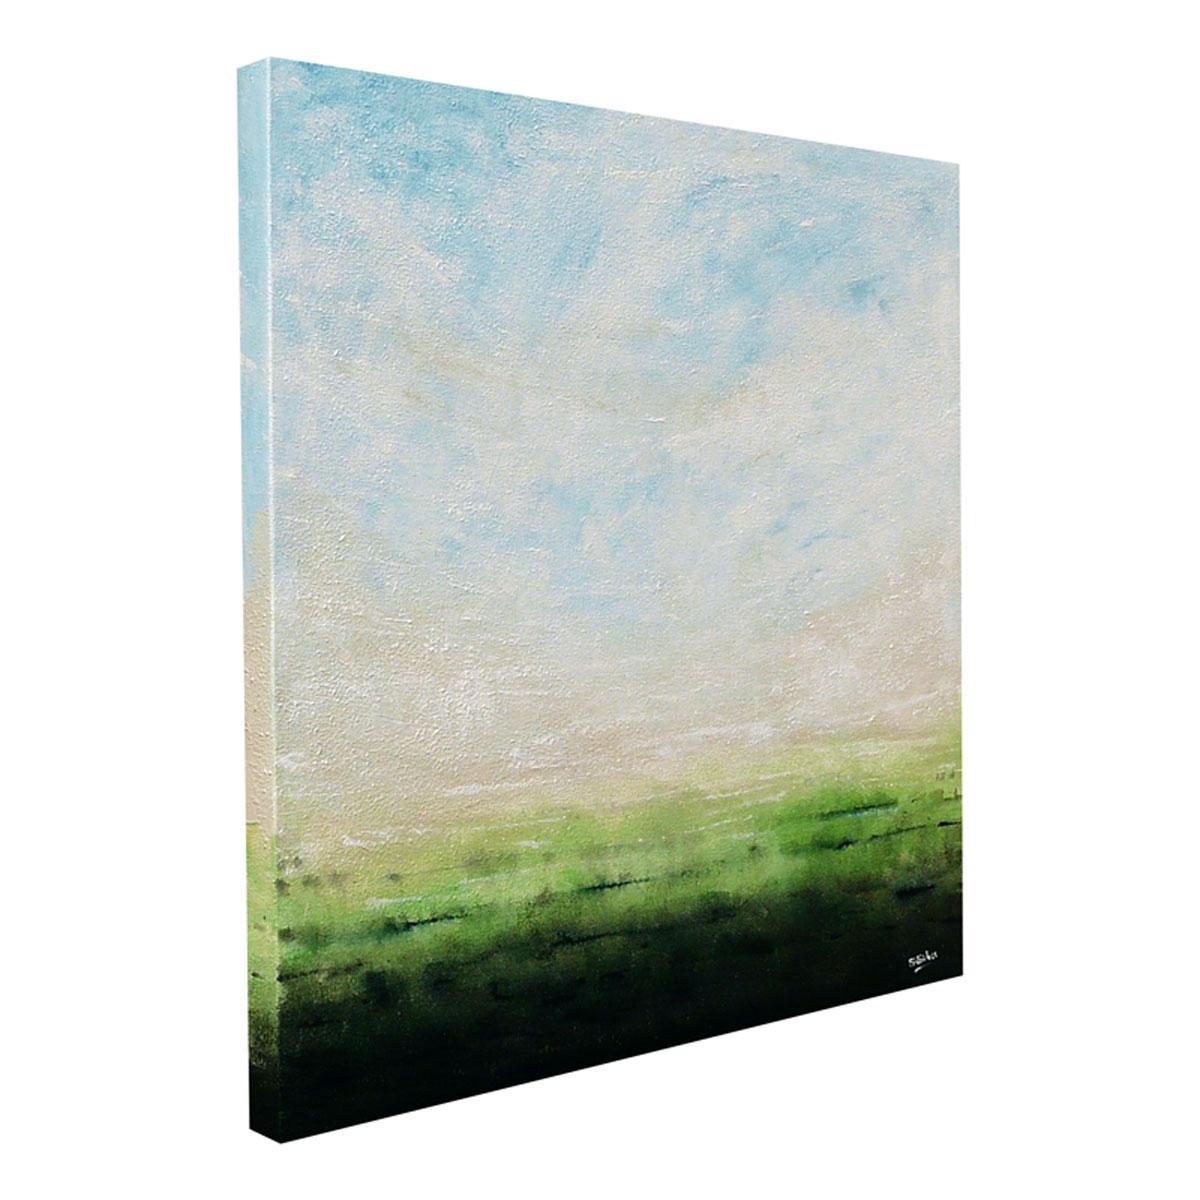 An abstract landscape painting full of texture, movement in subtle tones of green. Sometimes the landscape merges with the sky in transient light and each is indistinguishable from the other.  A Piece of original art with the drama and light that